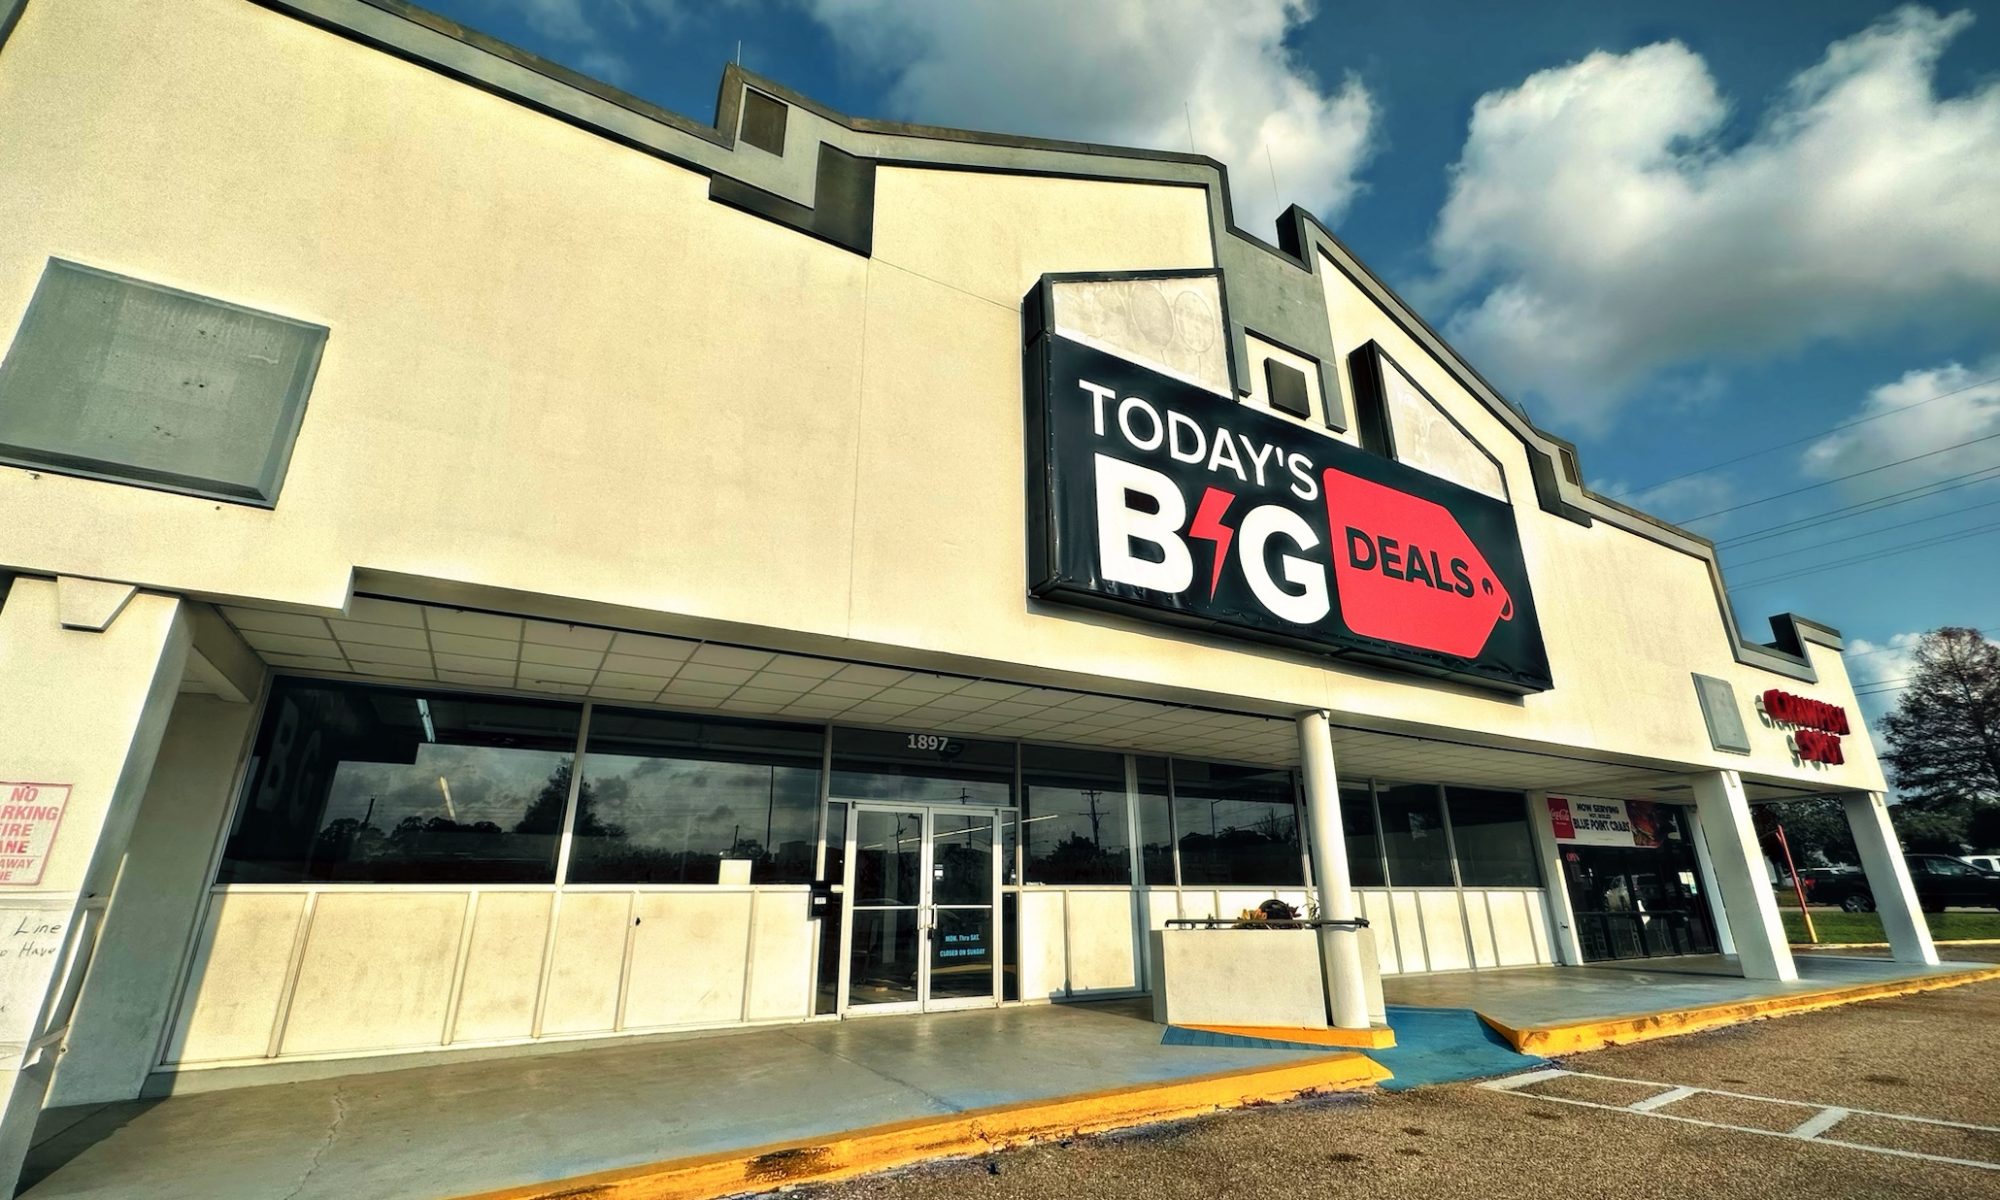 Today's Big Deals, A New Discount Bin-style Store Is Opening Soon